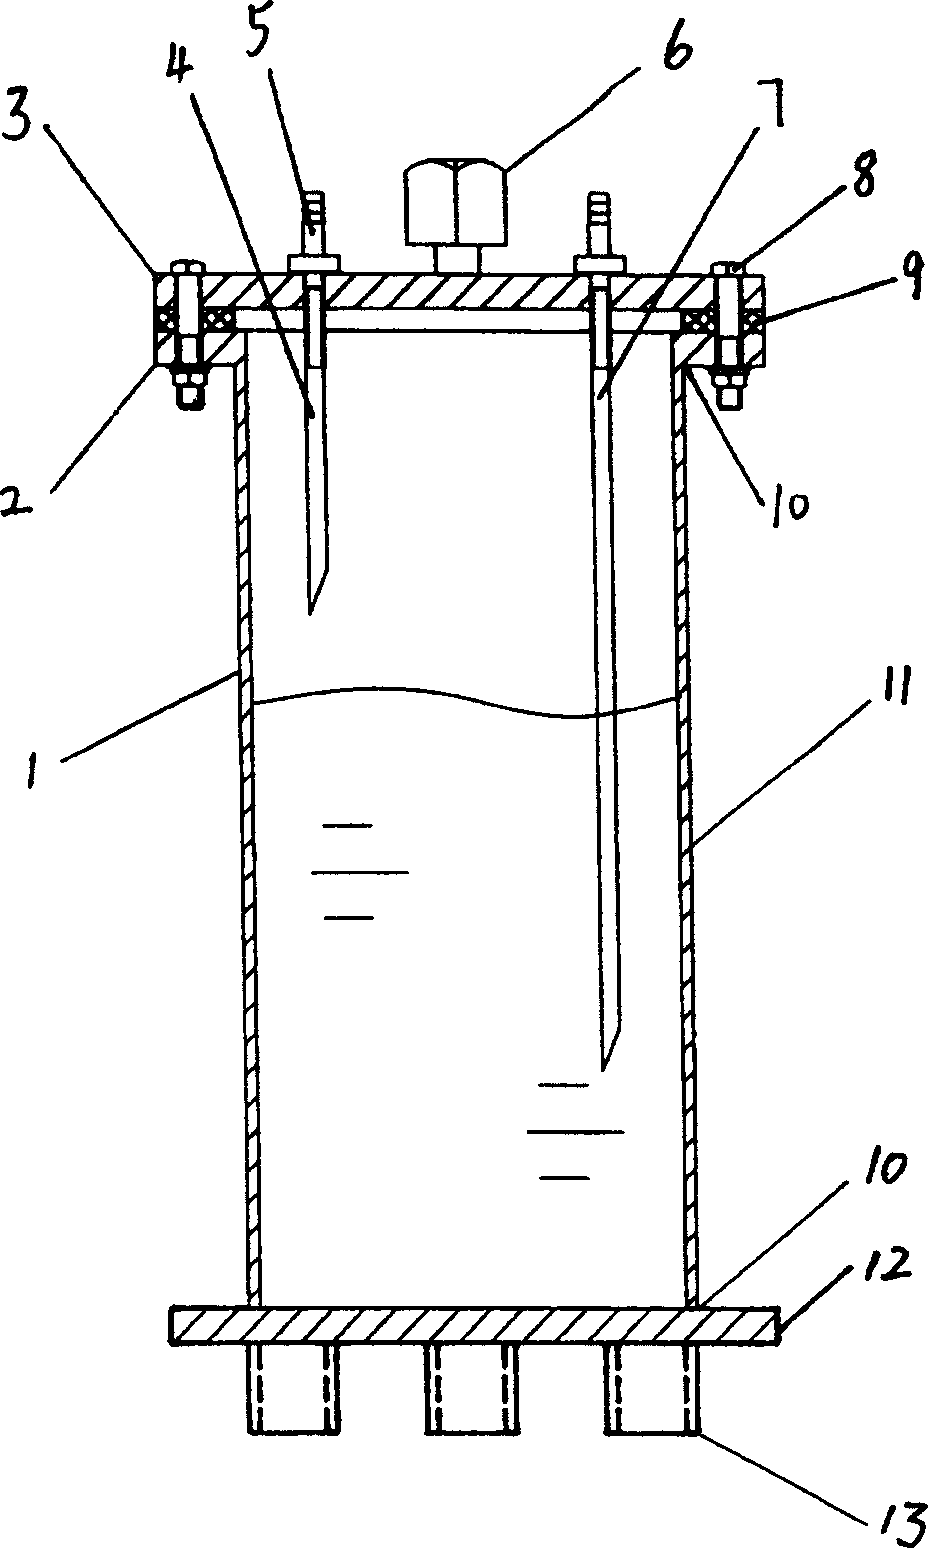 Pressure reducing wetting bucket and pressure reducing storage system including said wetting bucket